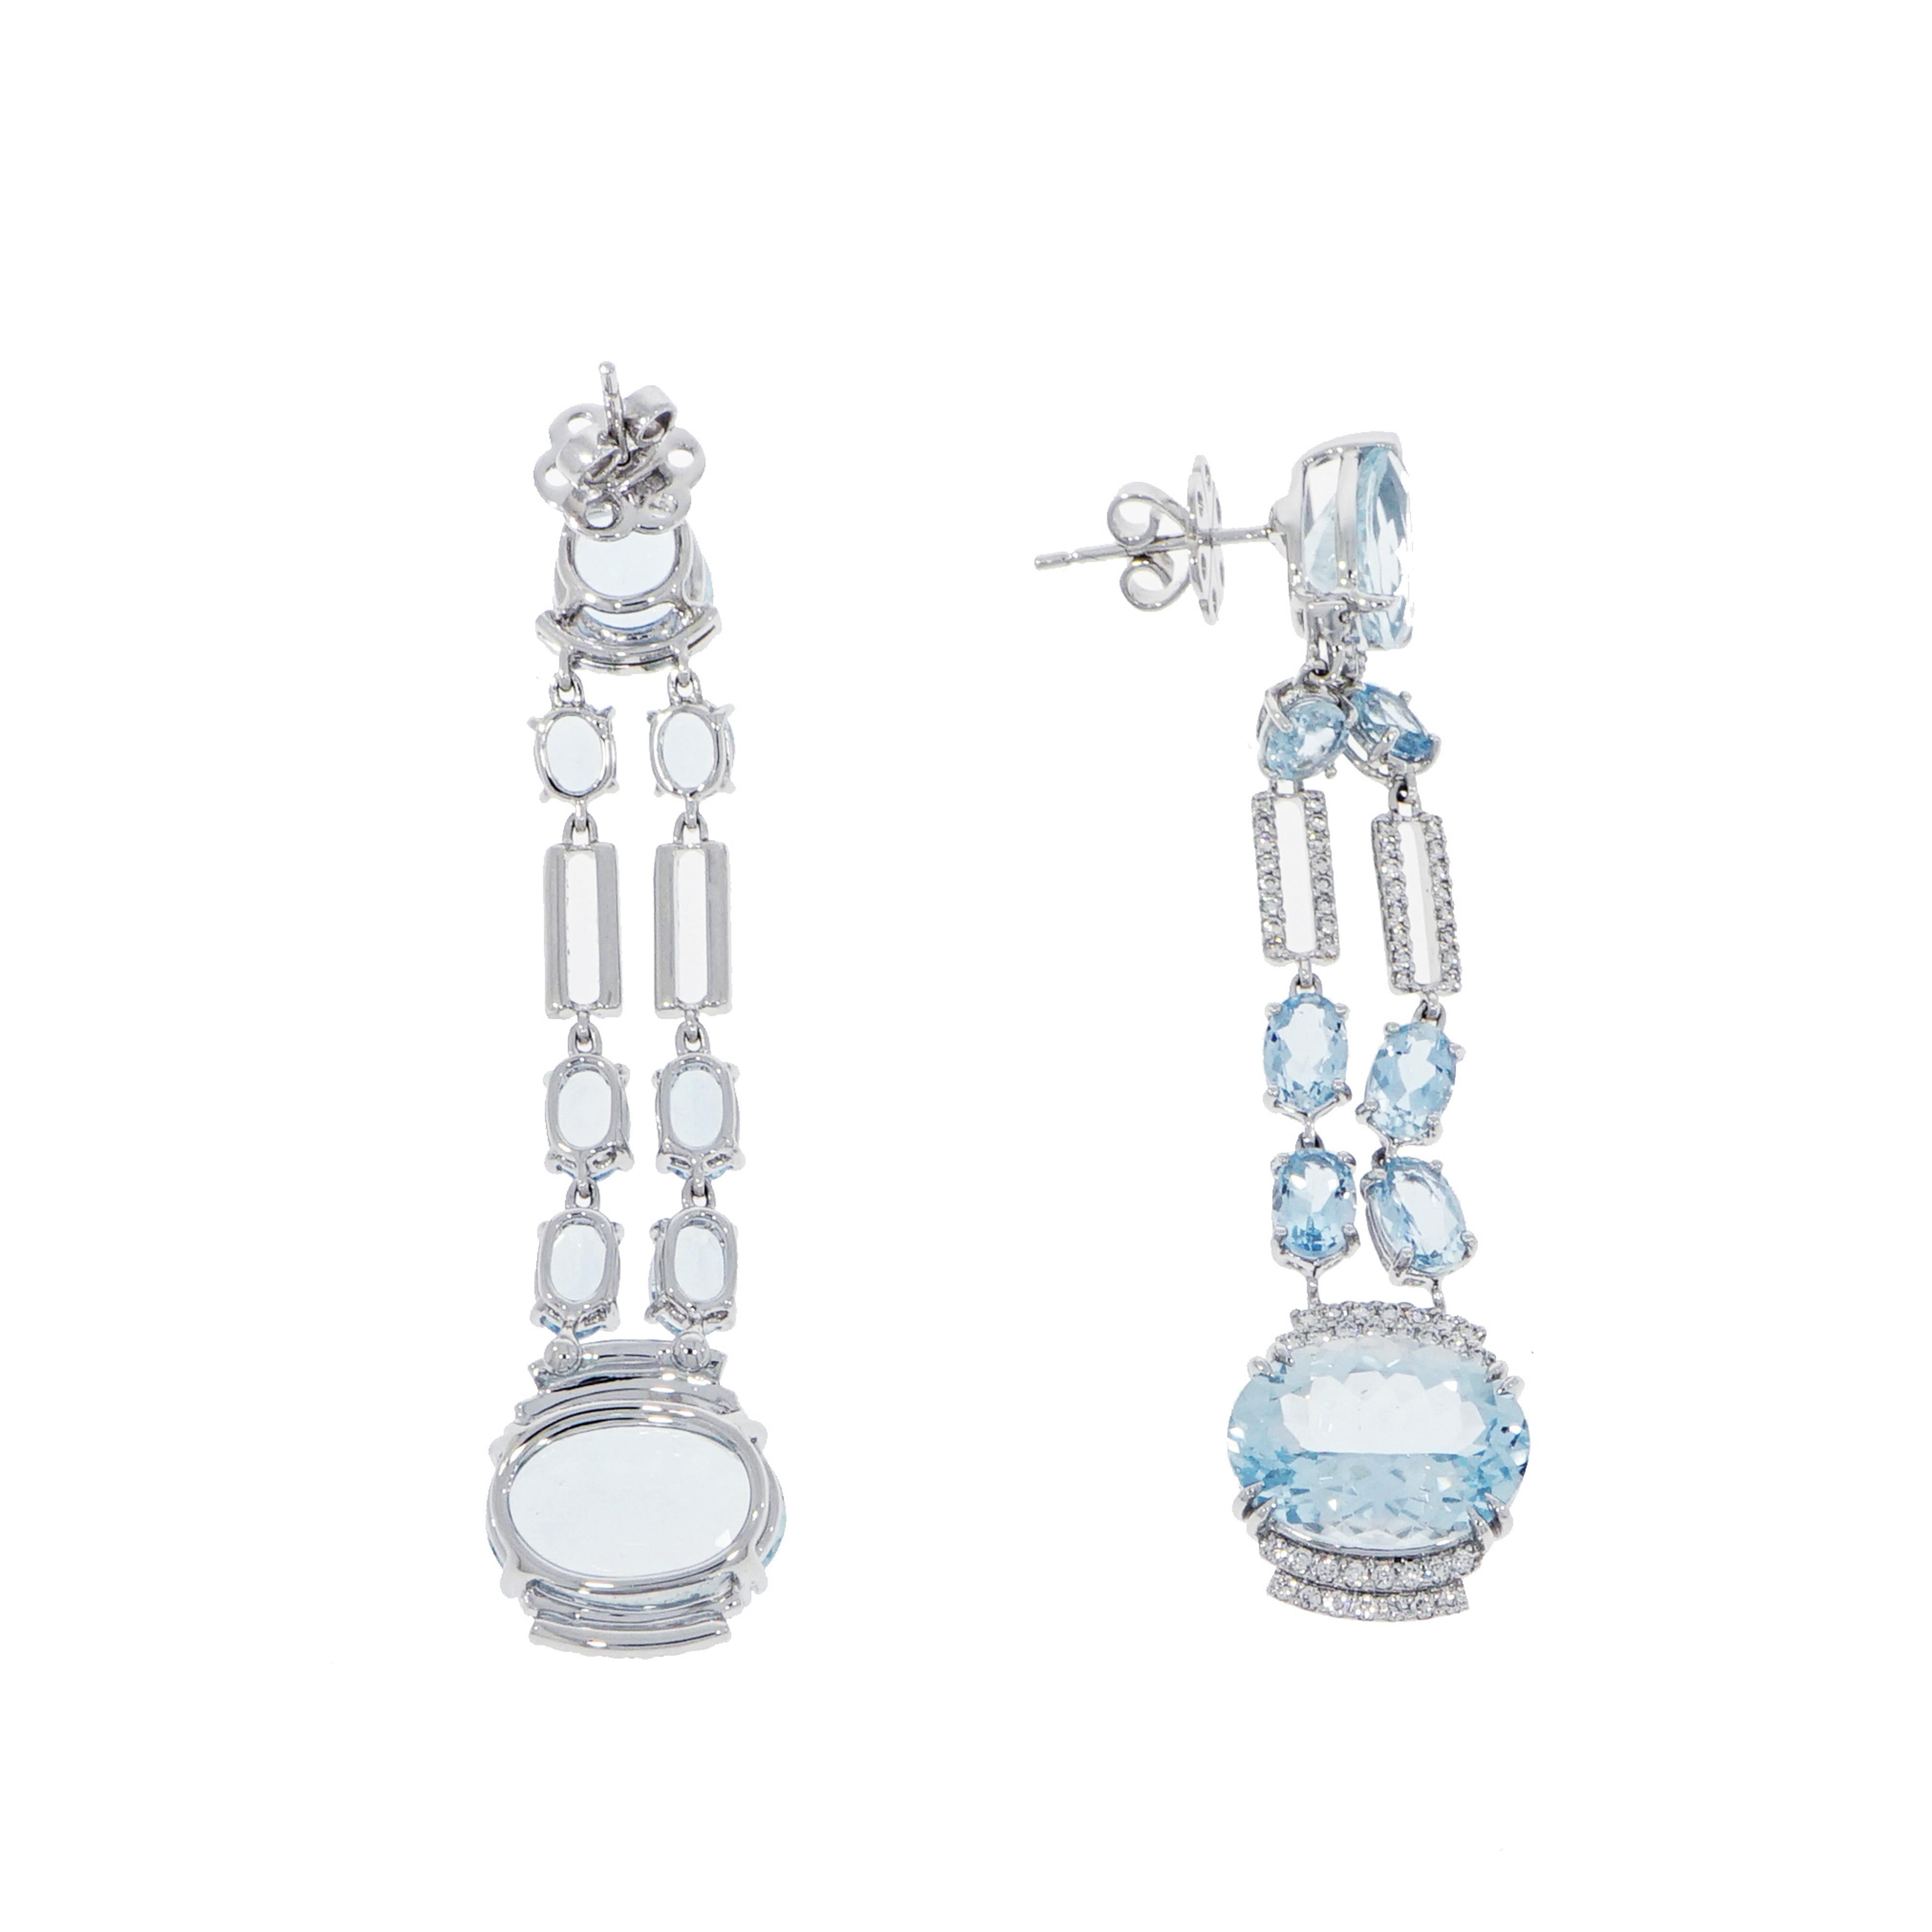 Waterside glam is incomplete without a few elements of sparkle. These Aquamarine and 
Diamond earrings are perfect for bringing color and structure to the shoulder and is a great summer accessory.
Designed and crafted in Italy with 19.32 carats